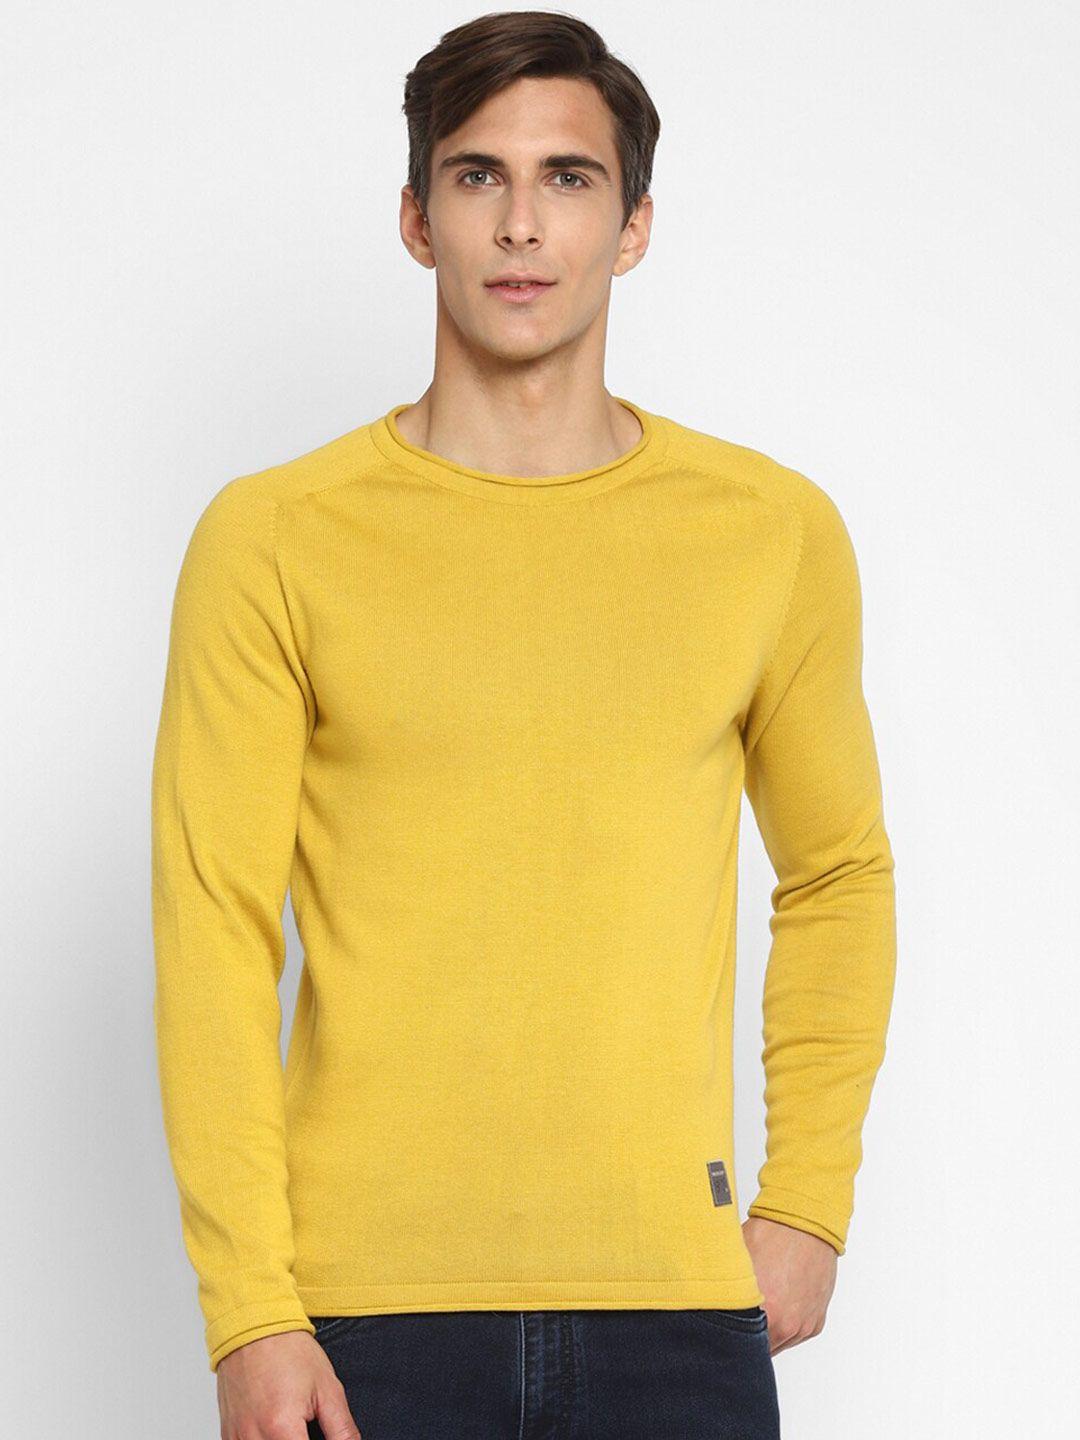 red-chief-men-yellow-cotton-pullover-sweater